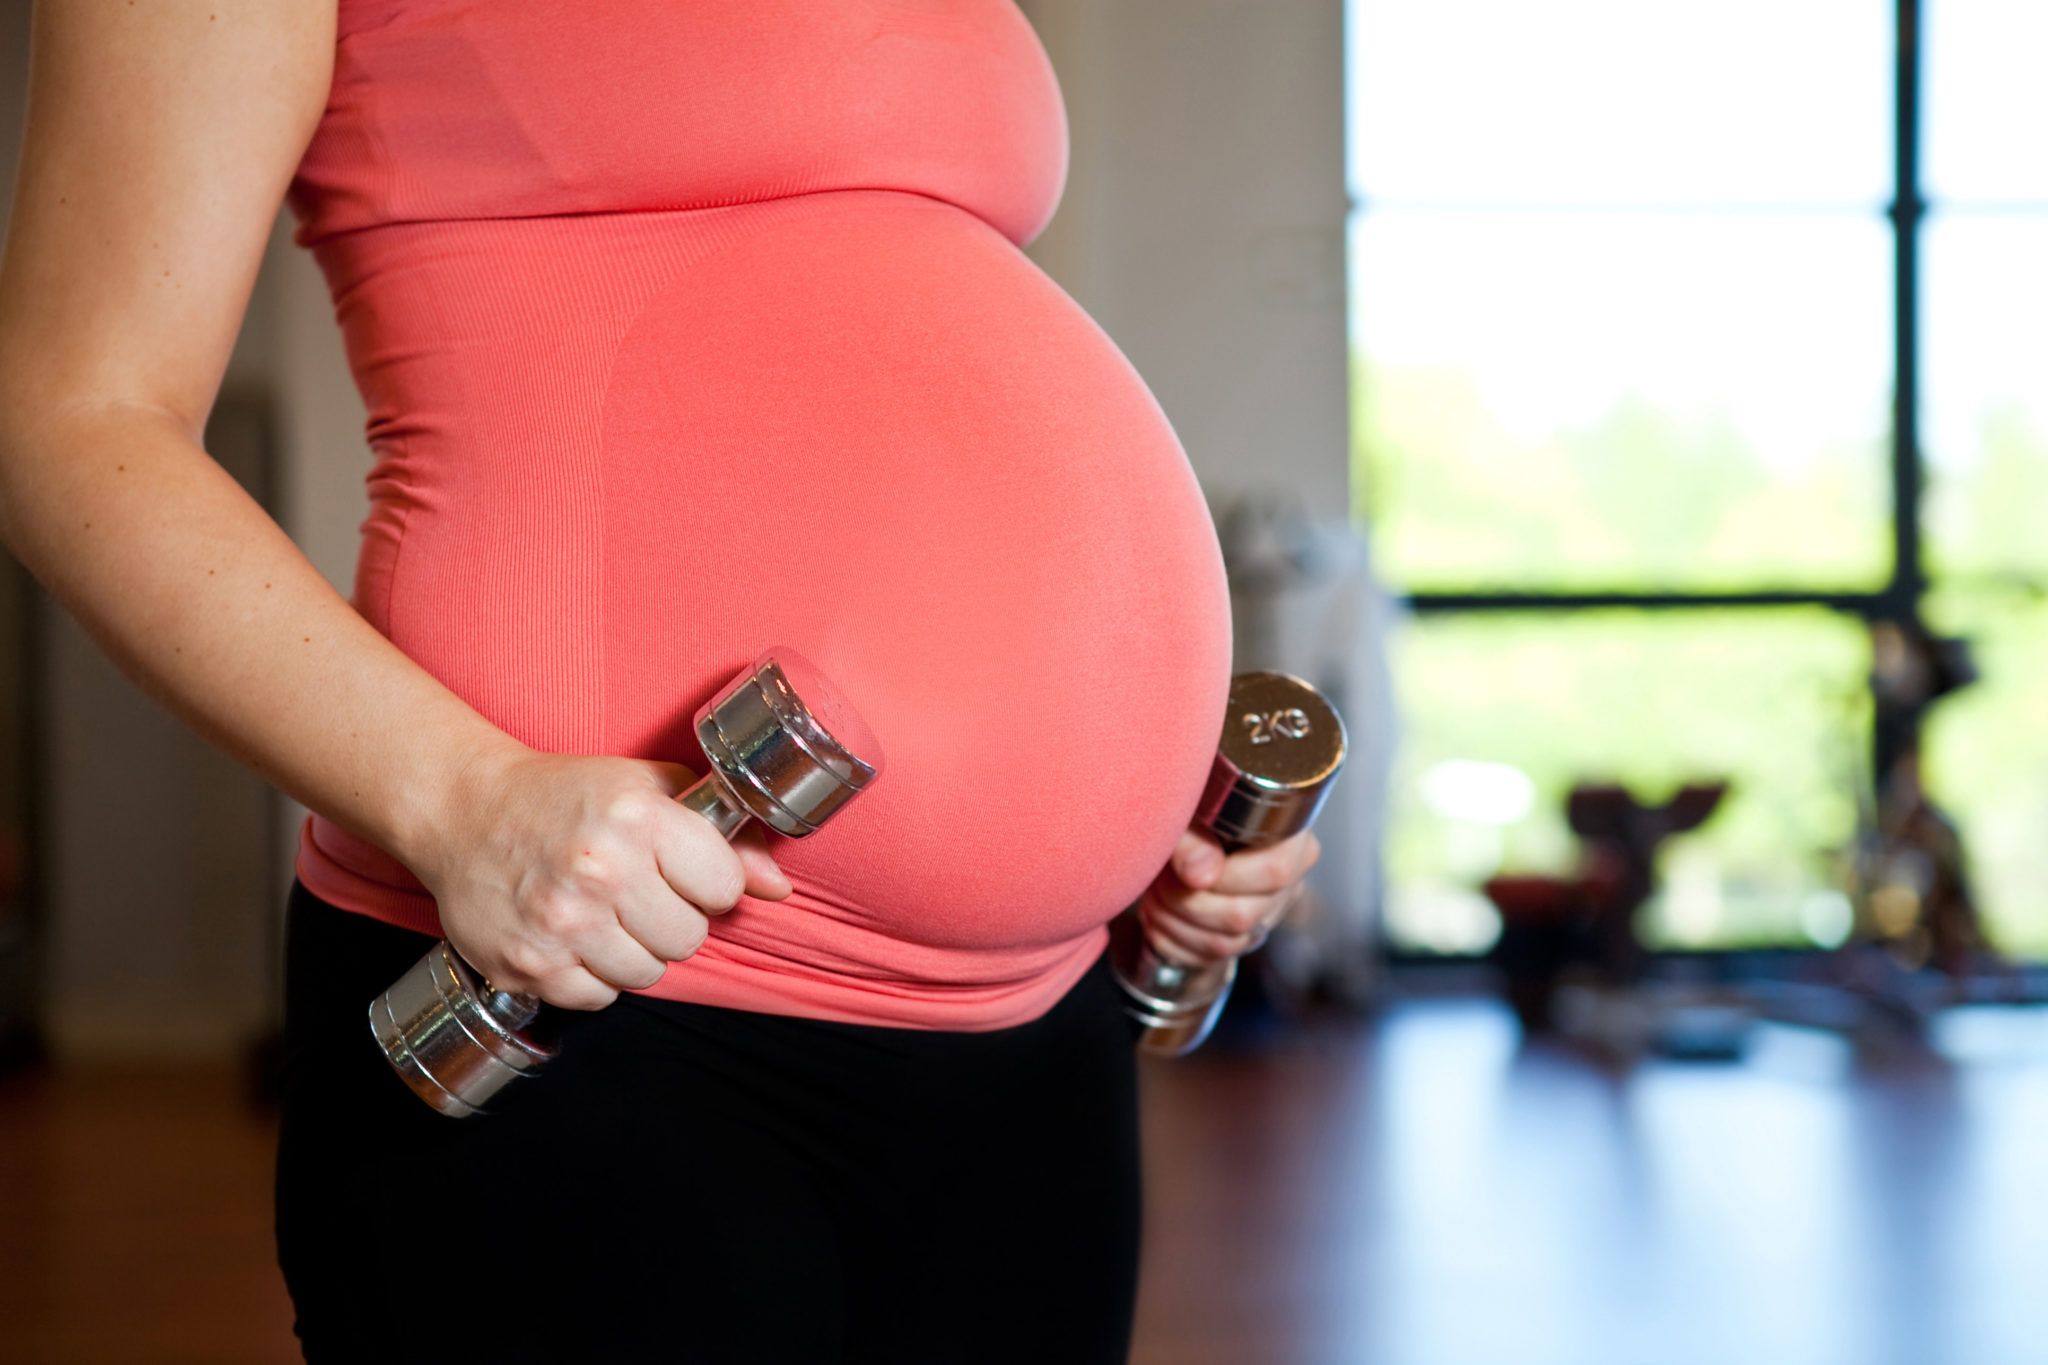 Workout Tips to Improve Fertility and Prepare for Pregnancy